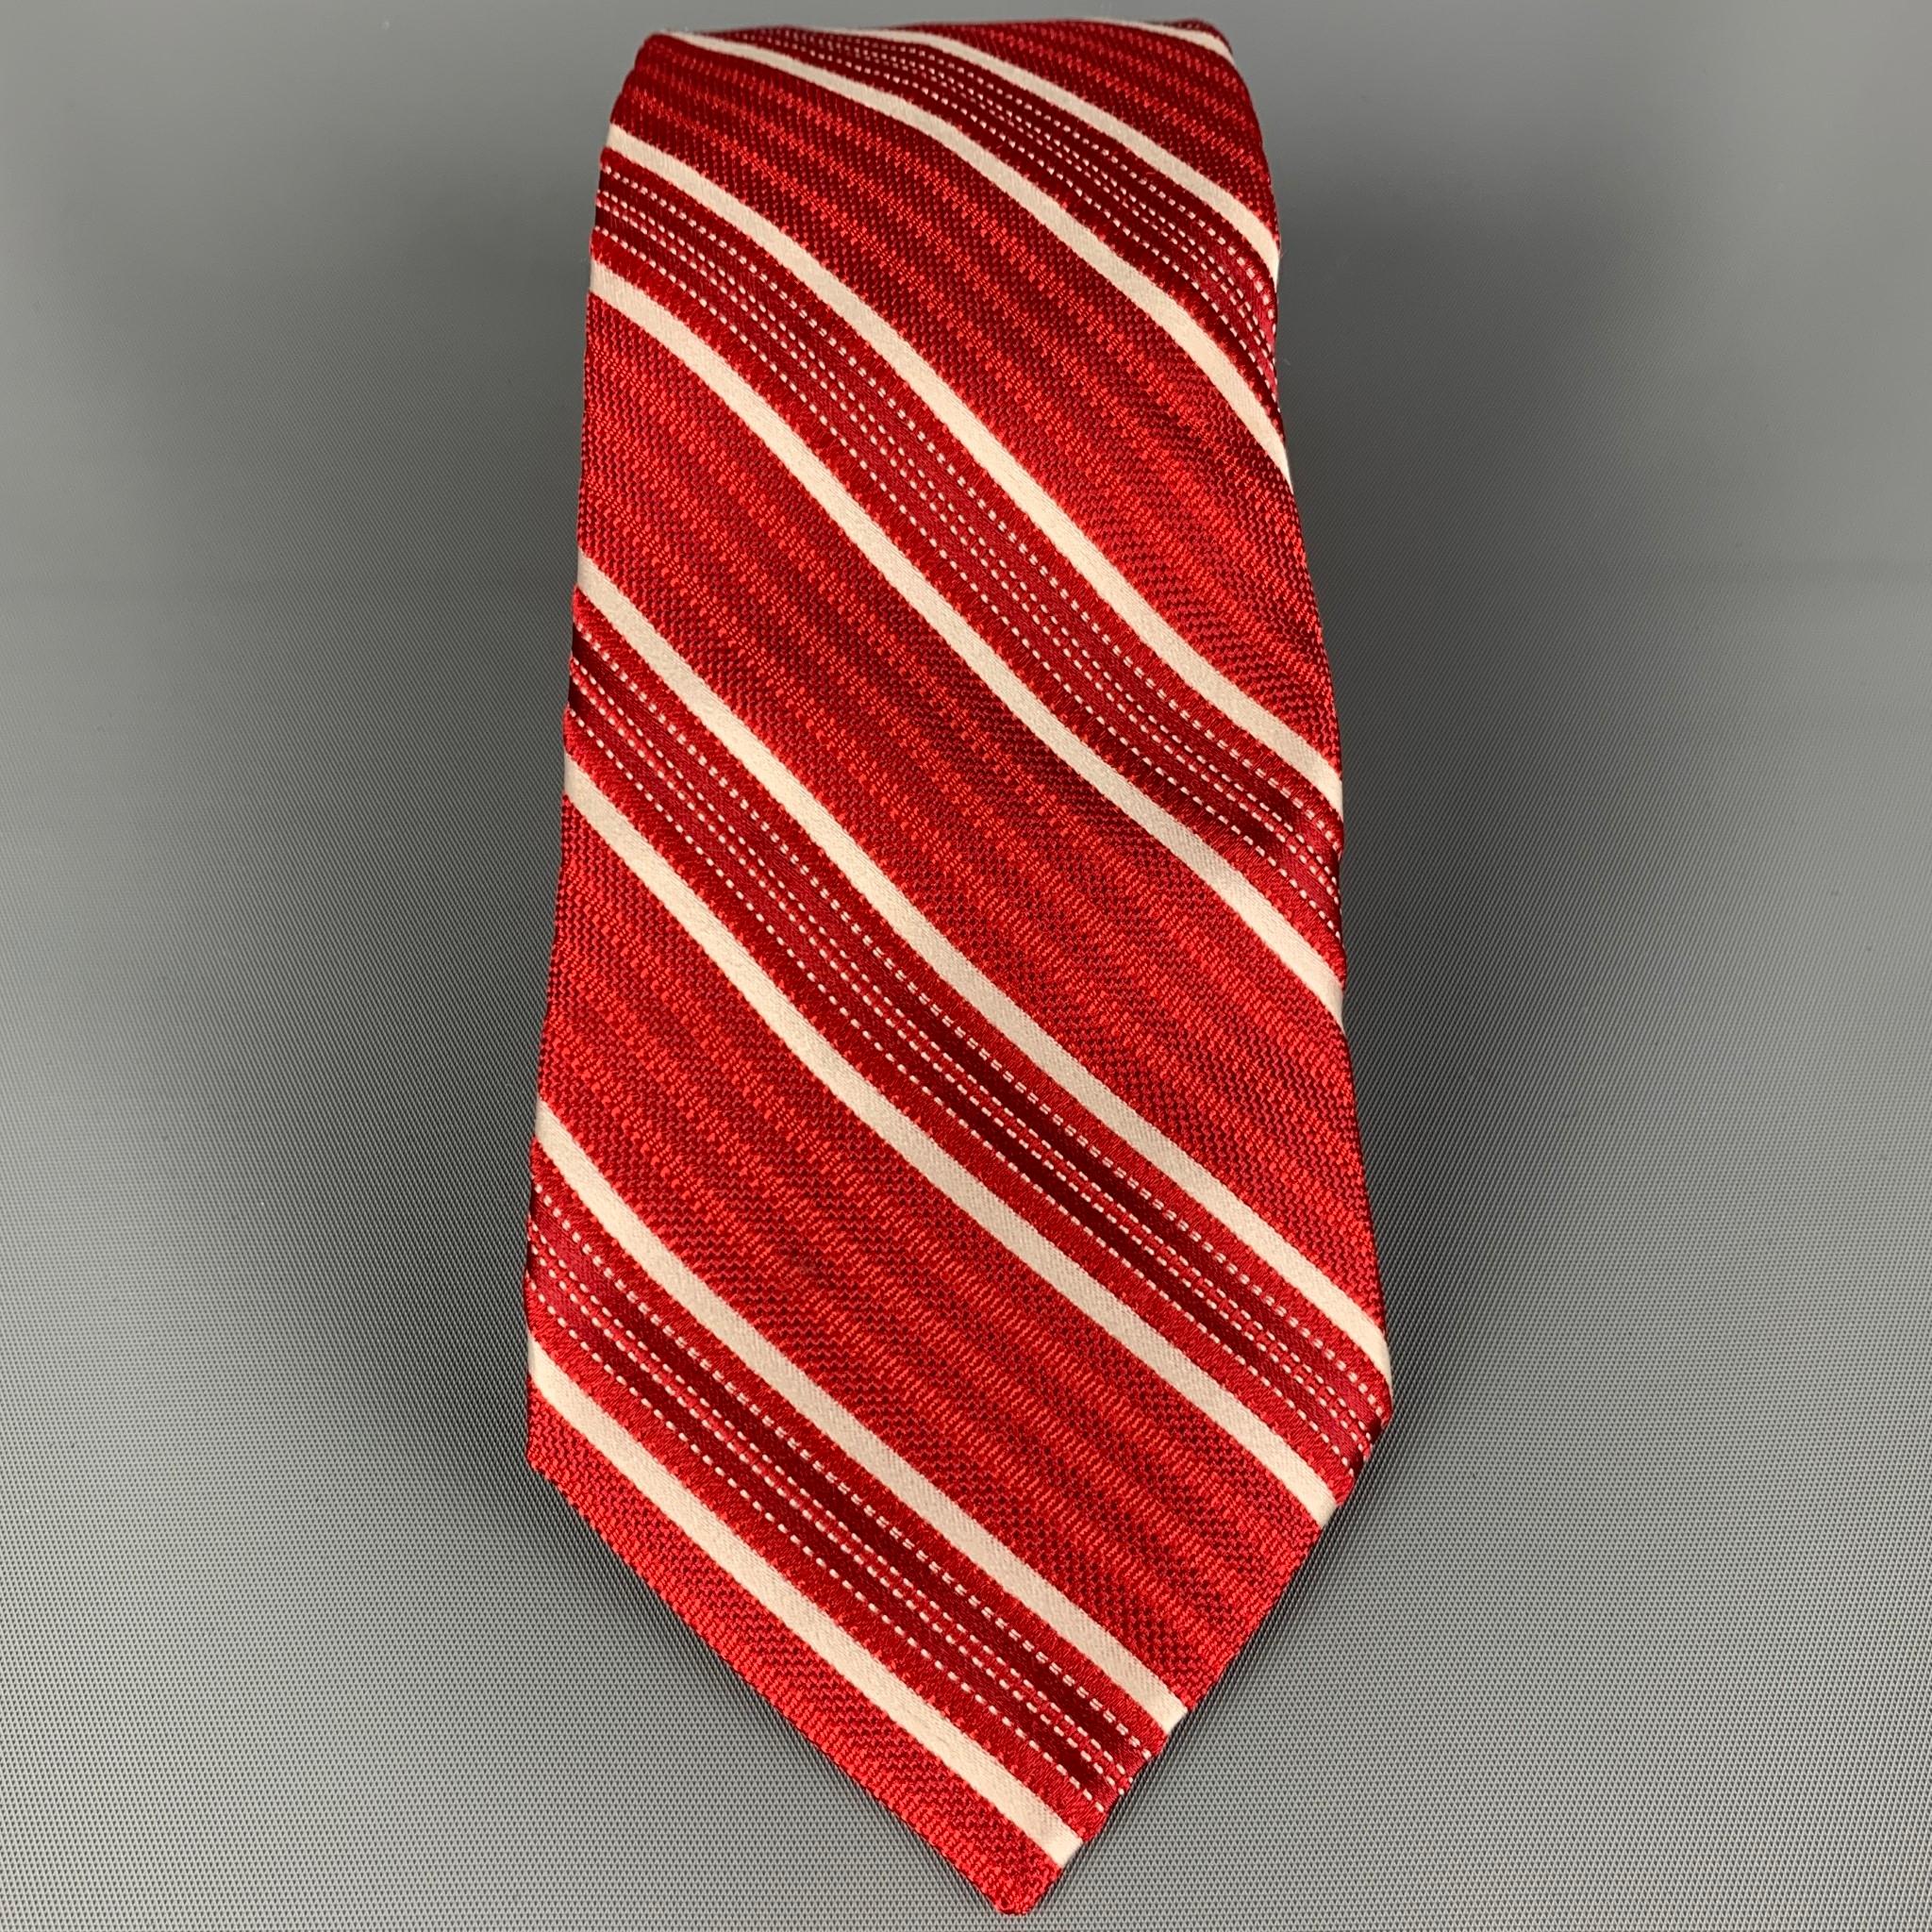 VALENTINO neck tie comes in a red & white diagonal stripe silk. Made in Italy. 

Excellent Pre-Owned Condition.

Measurements:

Width: 3.5 in. 